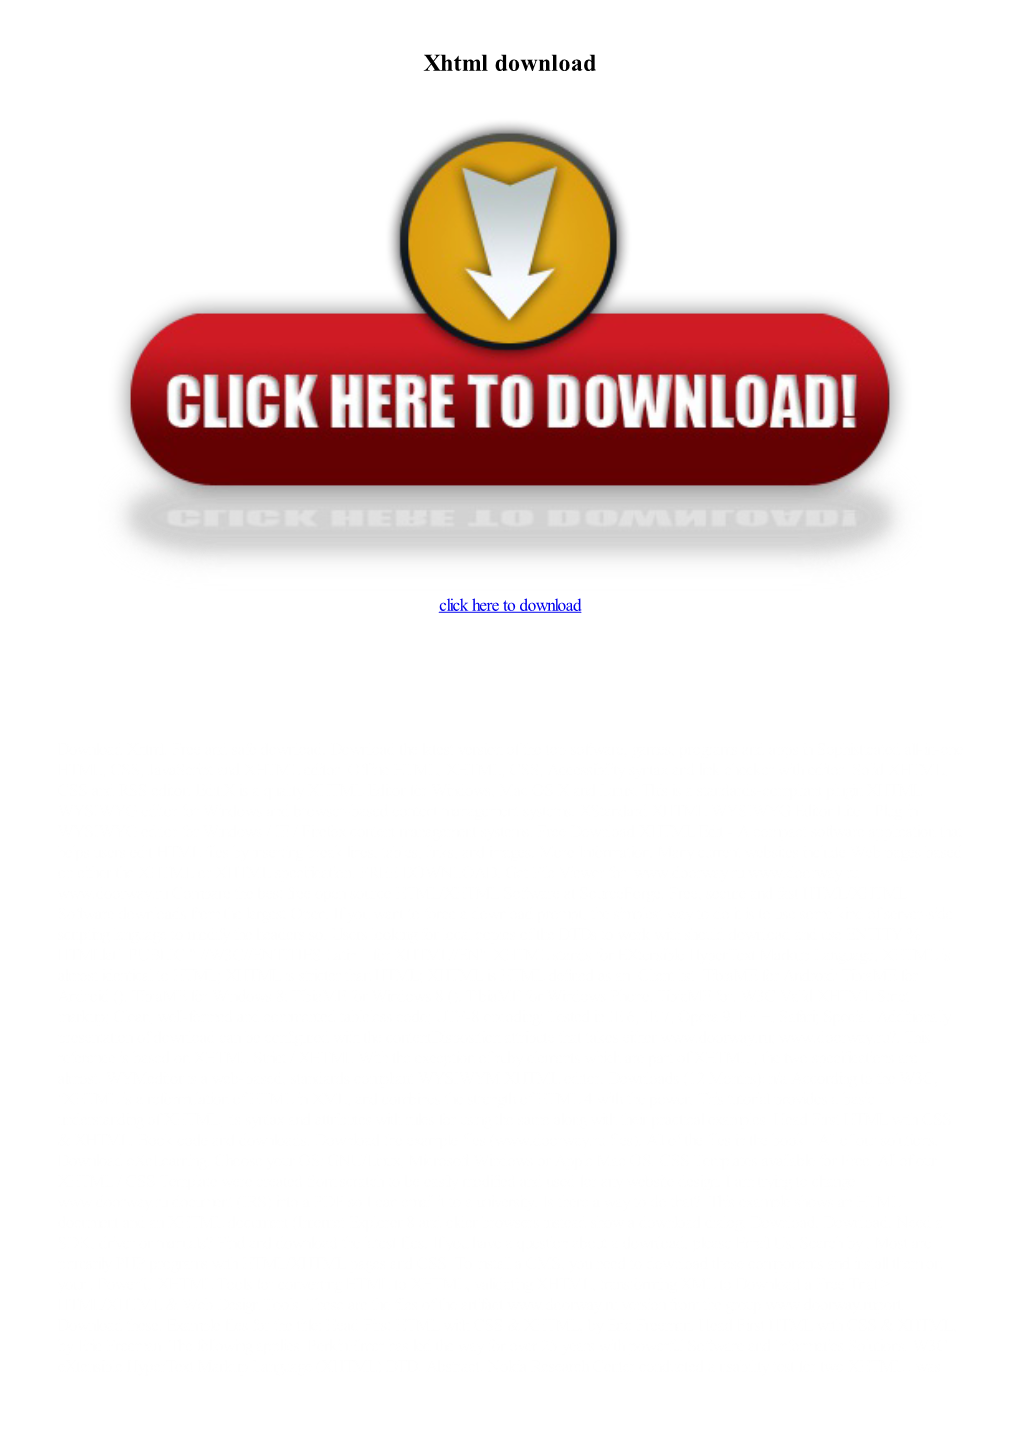 Xhtml Download